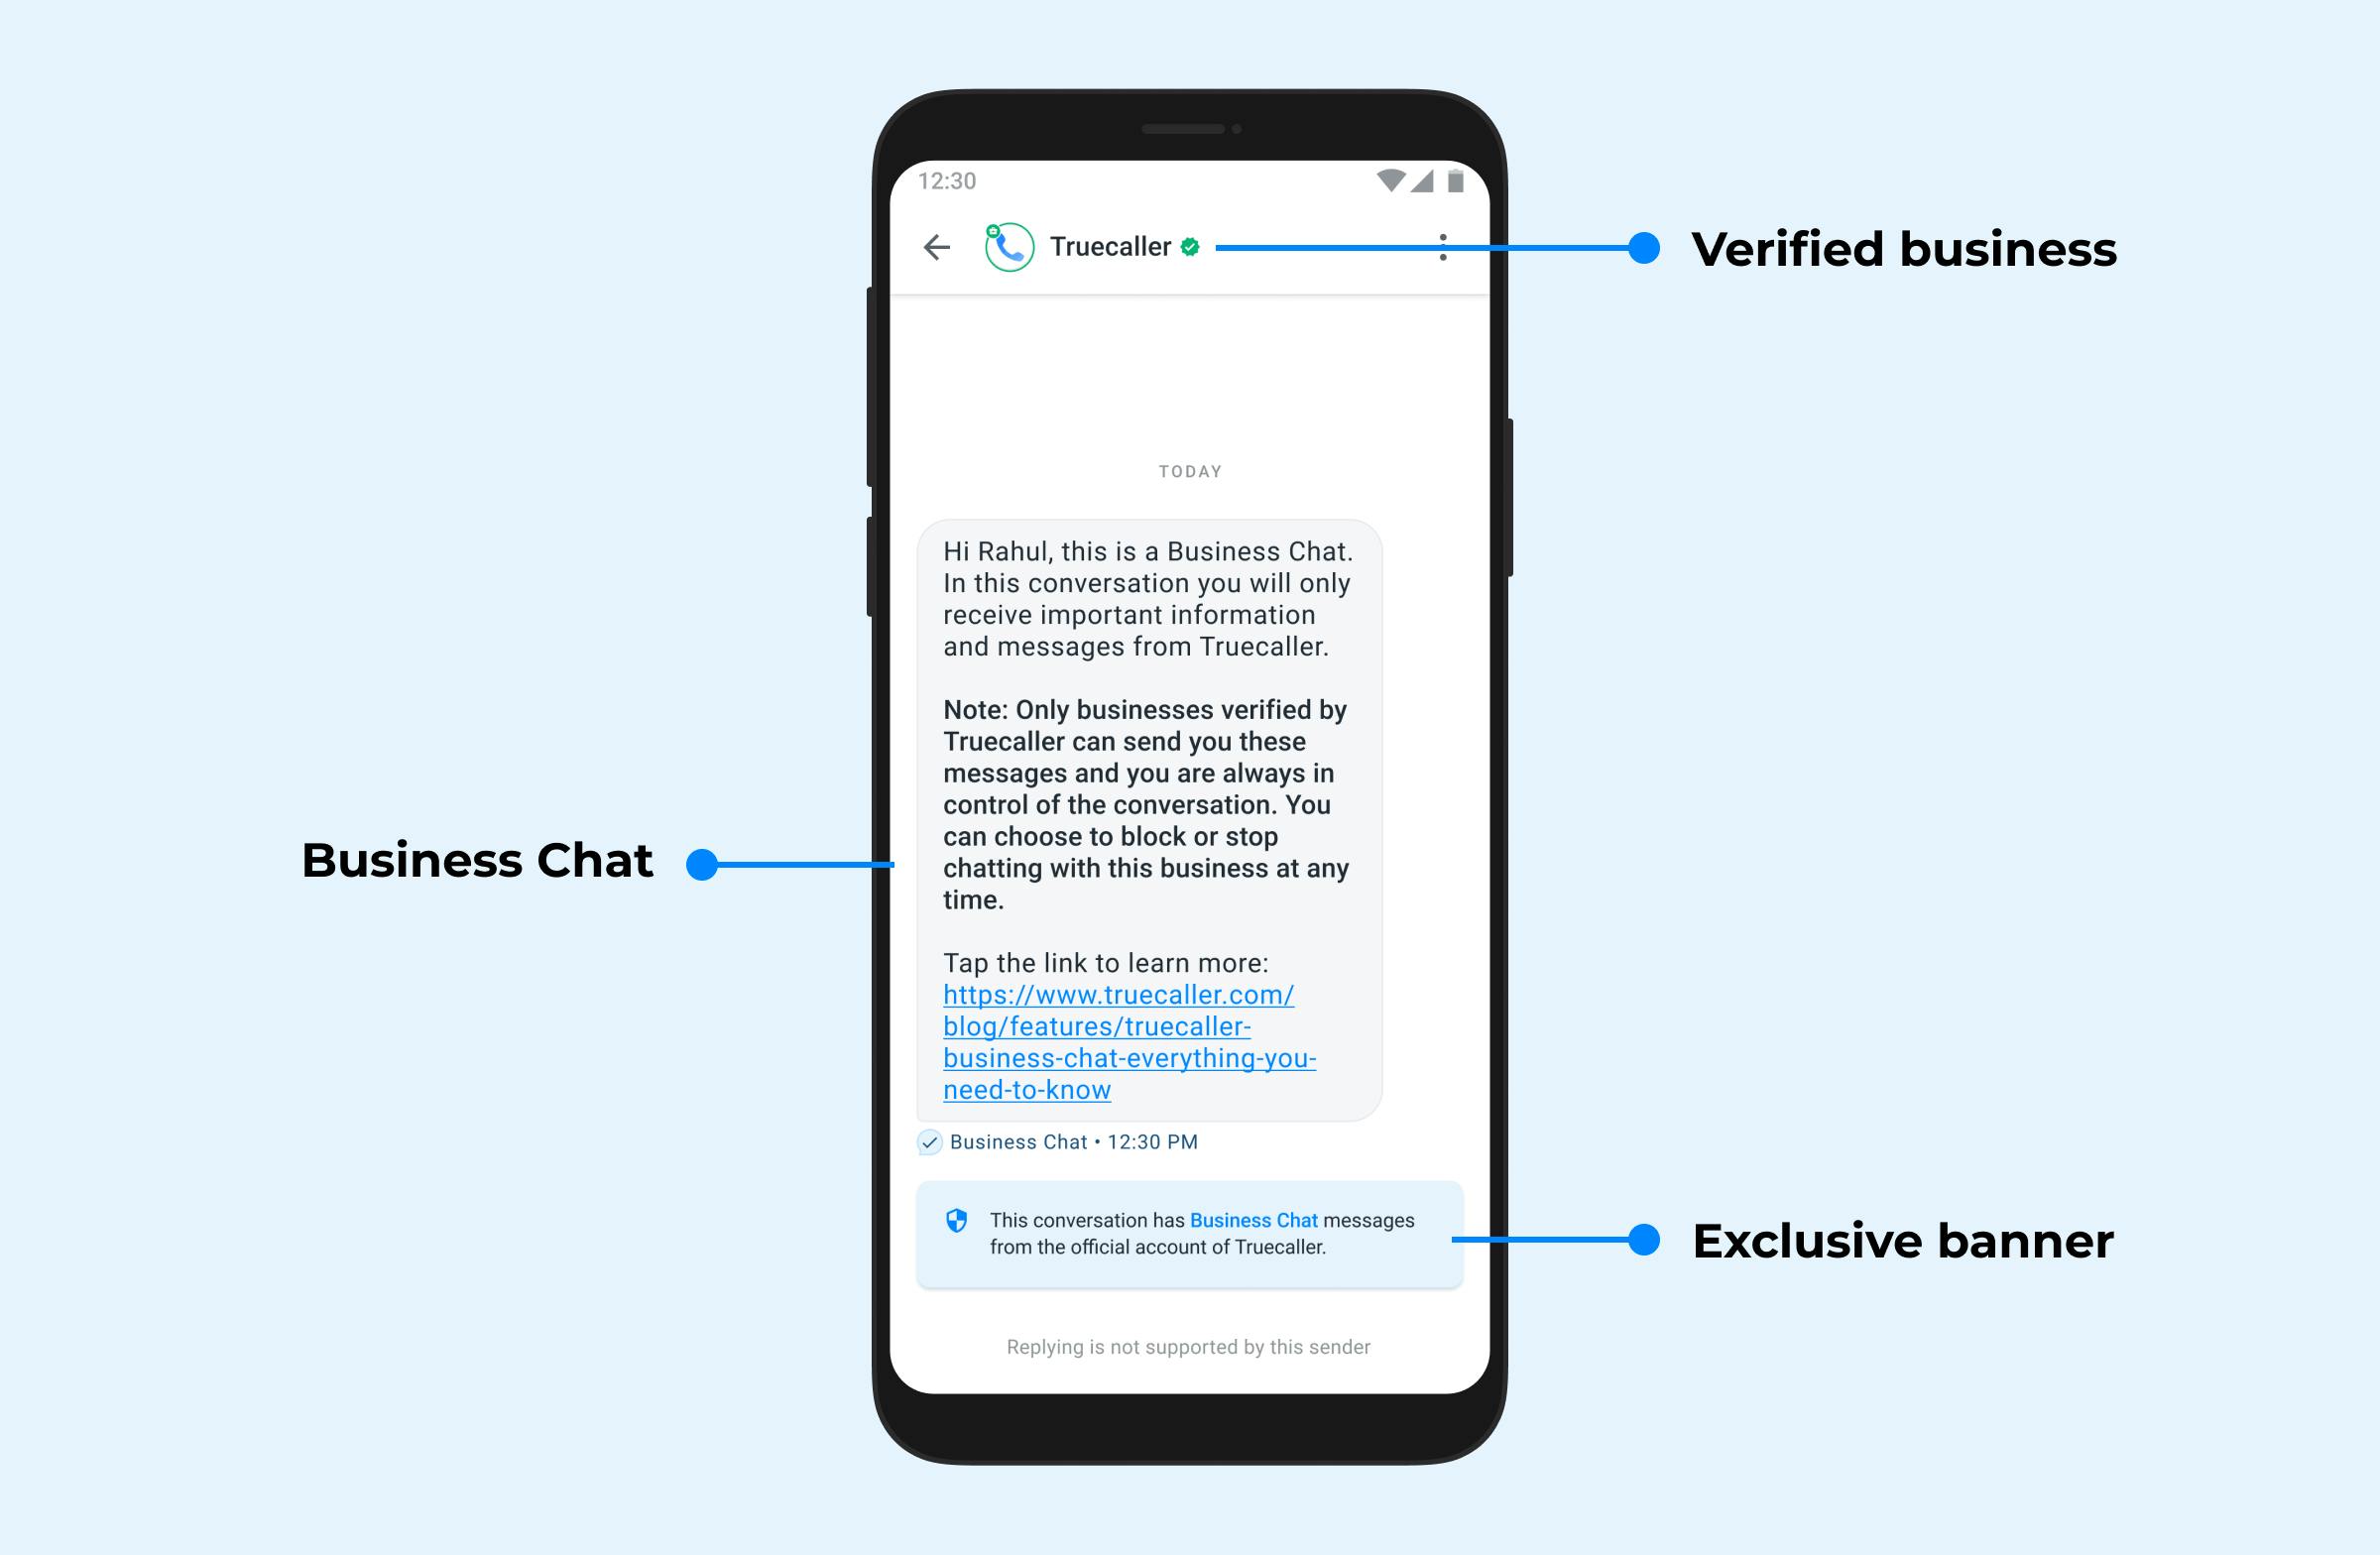 Phone screen with text highlighting three components of the Truecaller Business Chat feature - verified business at the top, the actual business chat message and an exclusive banner at the bottom verifying that the message is from the official truecaller account.